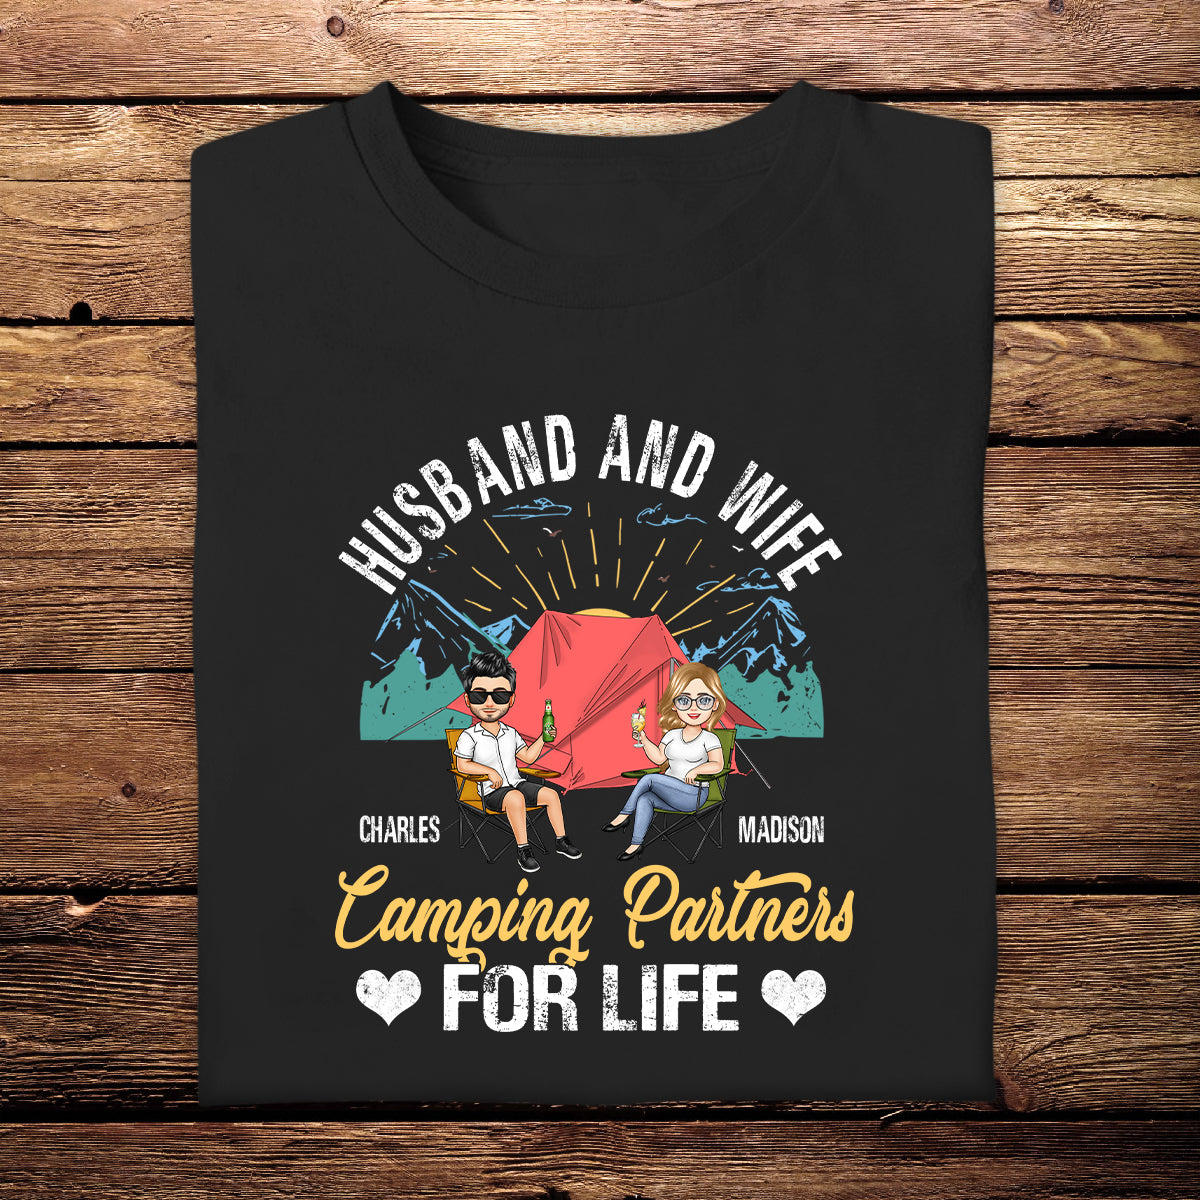 Camping Partners For Life - Personalized Apparel - Gift For Couple, Camping, Summer